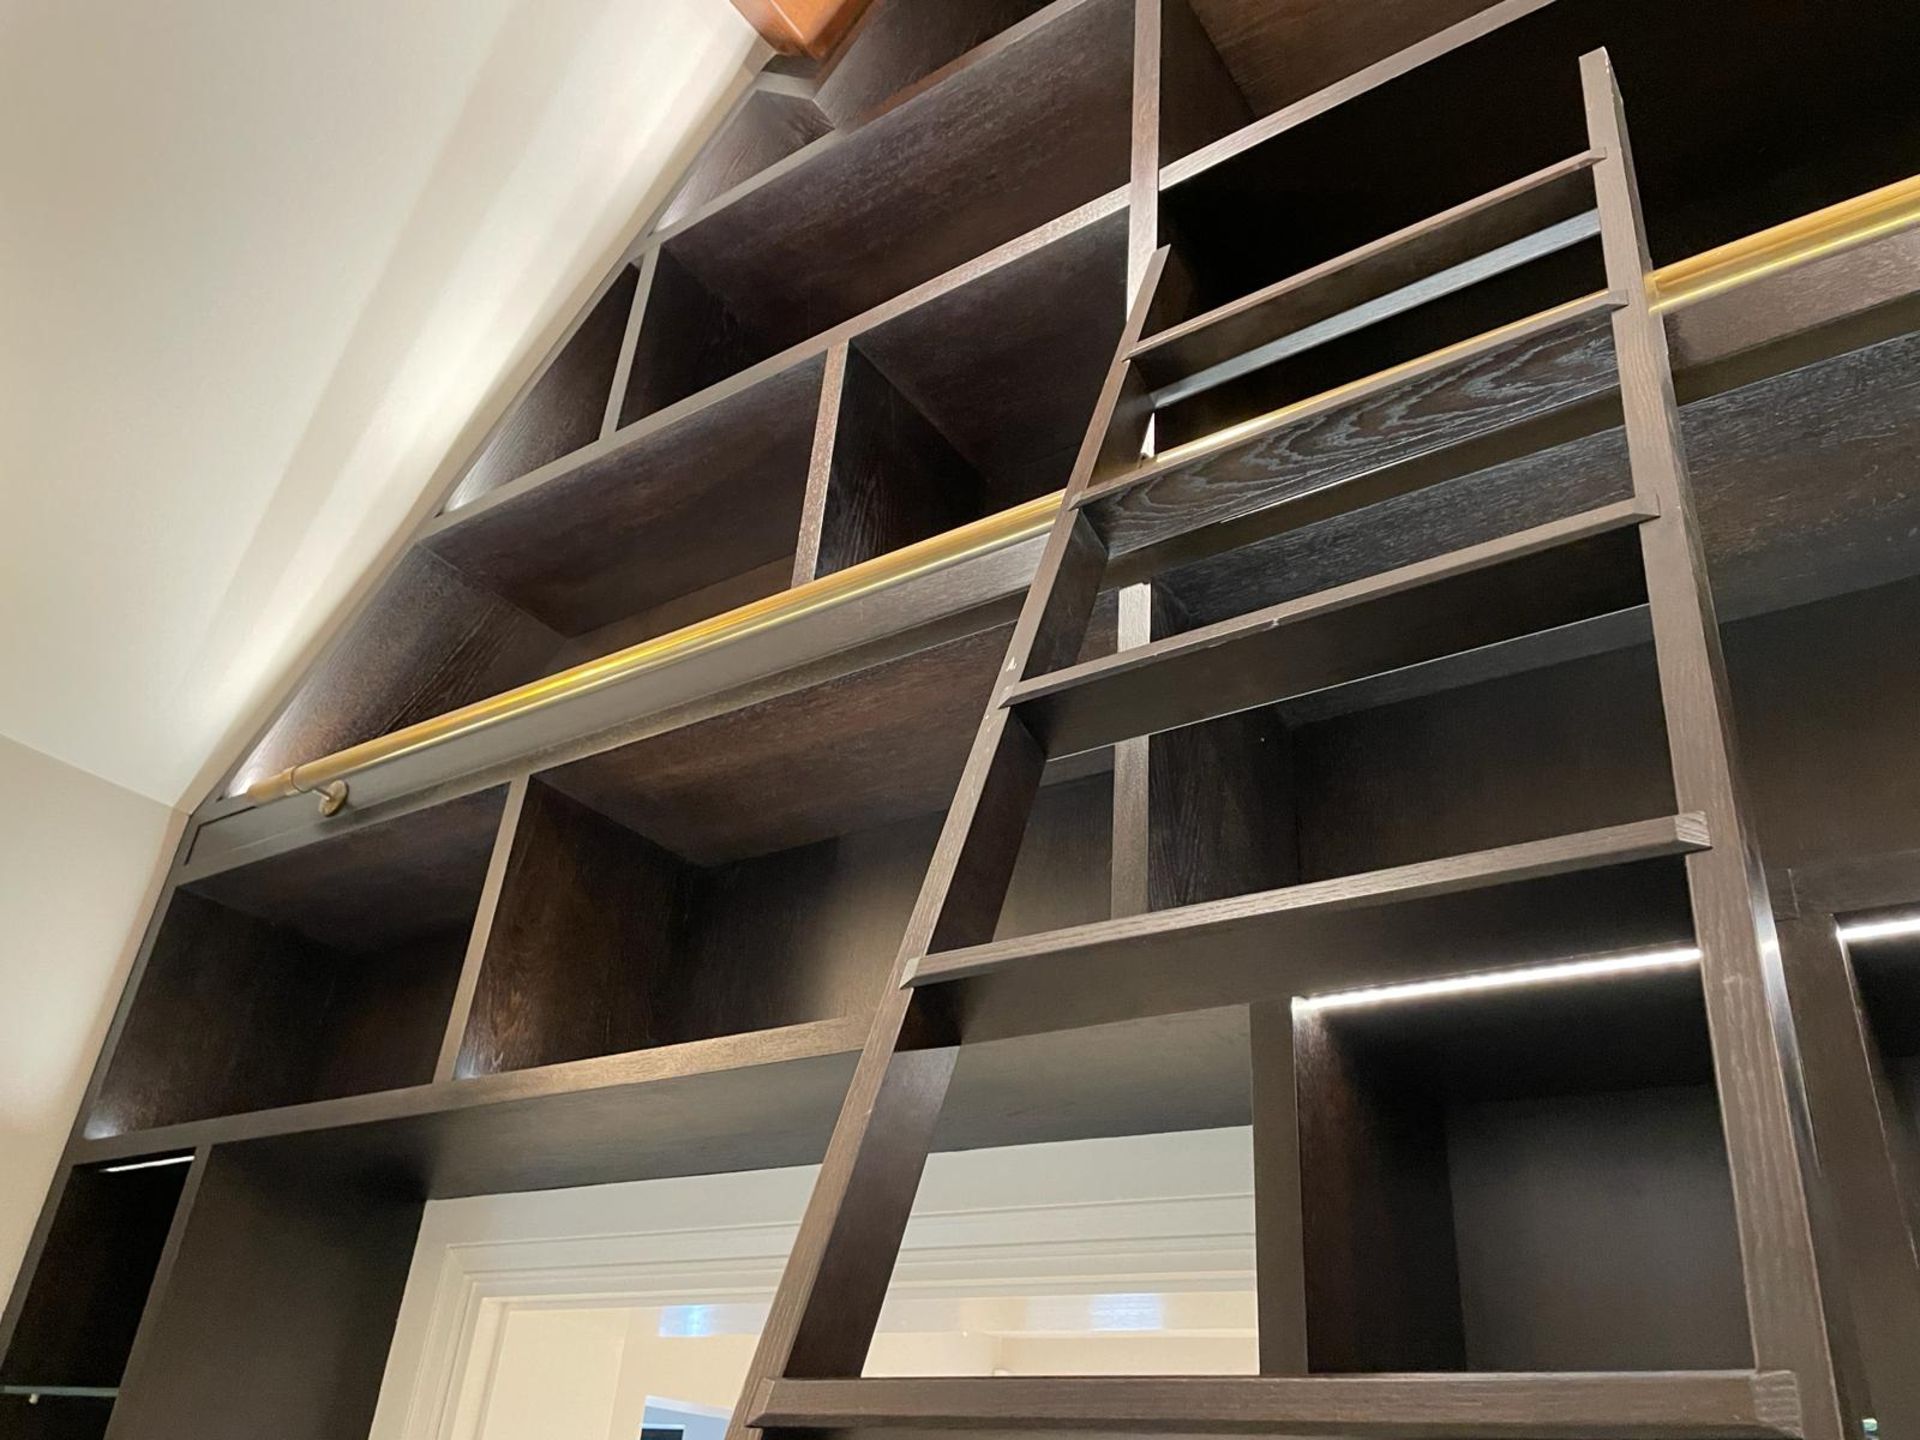 1 x Bespoke 4.7-Metre Wide Fitted Luxury Home Library Solid Wood Bookcase Wall Storage - Image 20 of 23